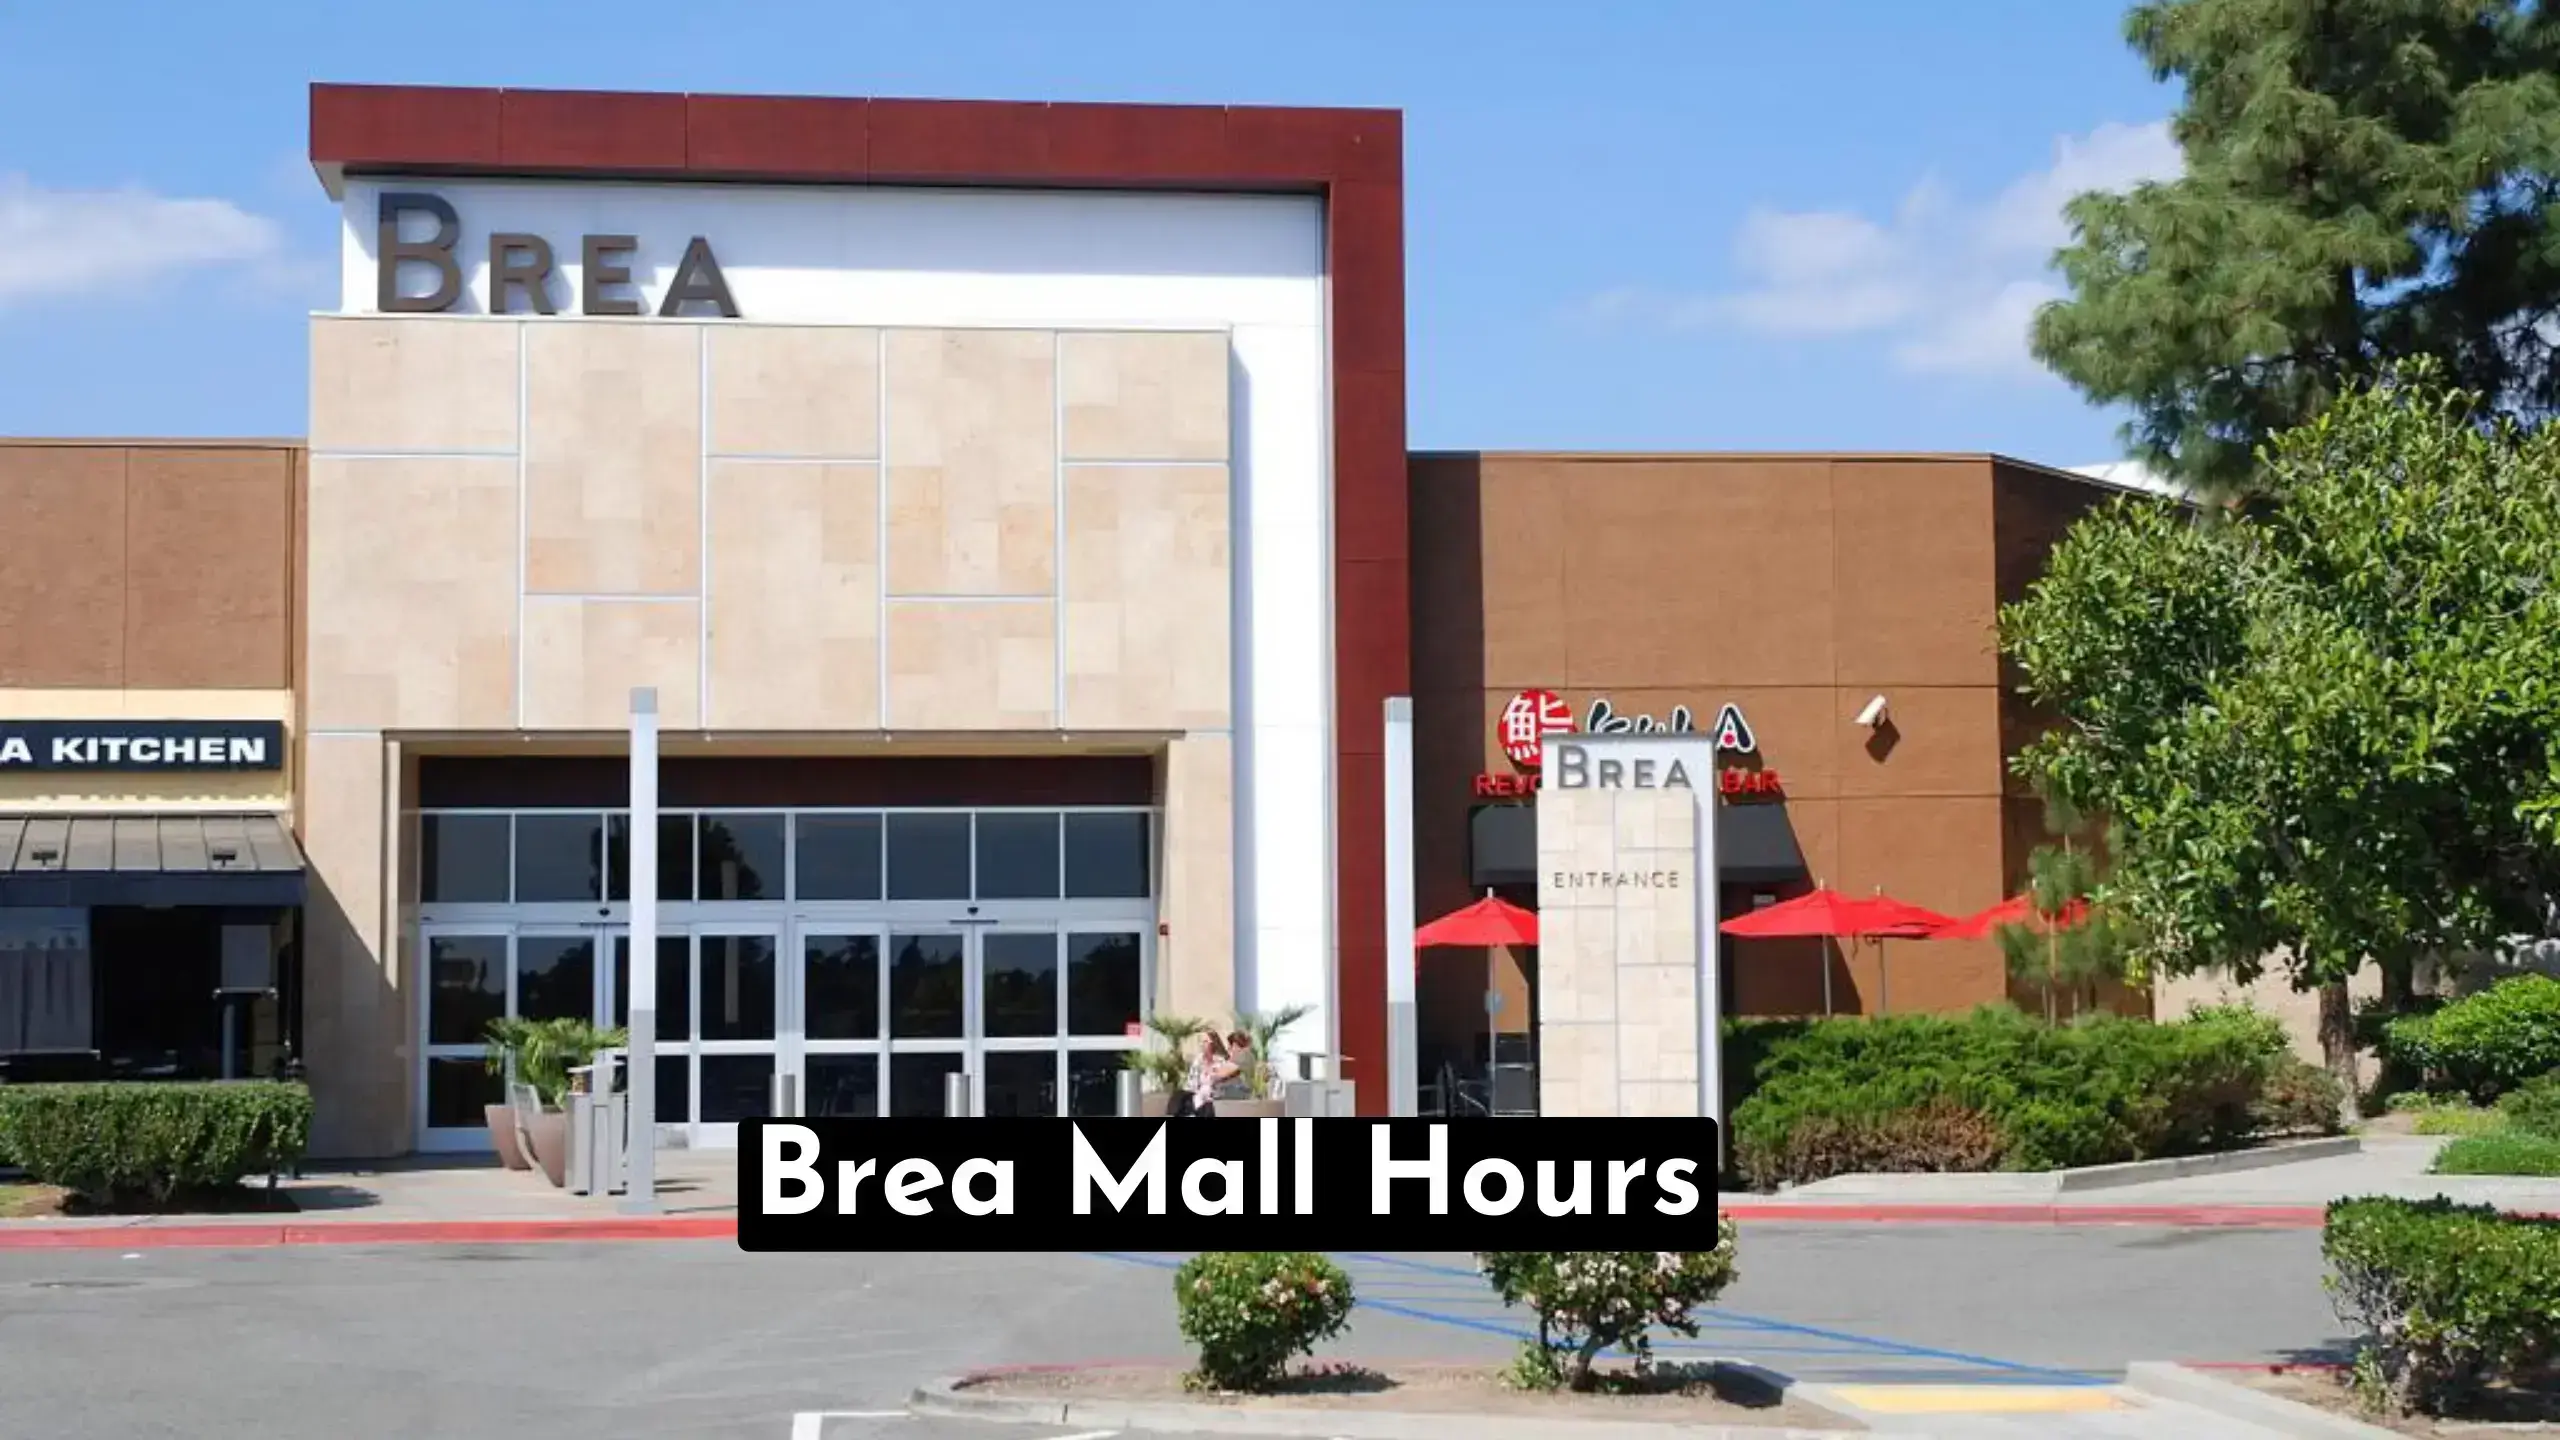 "Discover the perfect shopping hours at Brea Mall Hours 2023. From open to close, plan your visit for the ultimate shopping and dining experience.